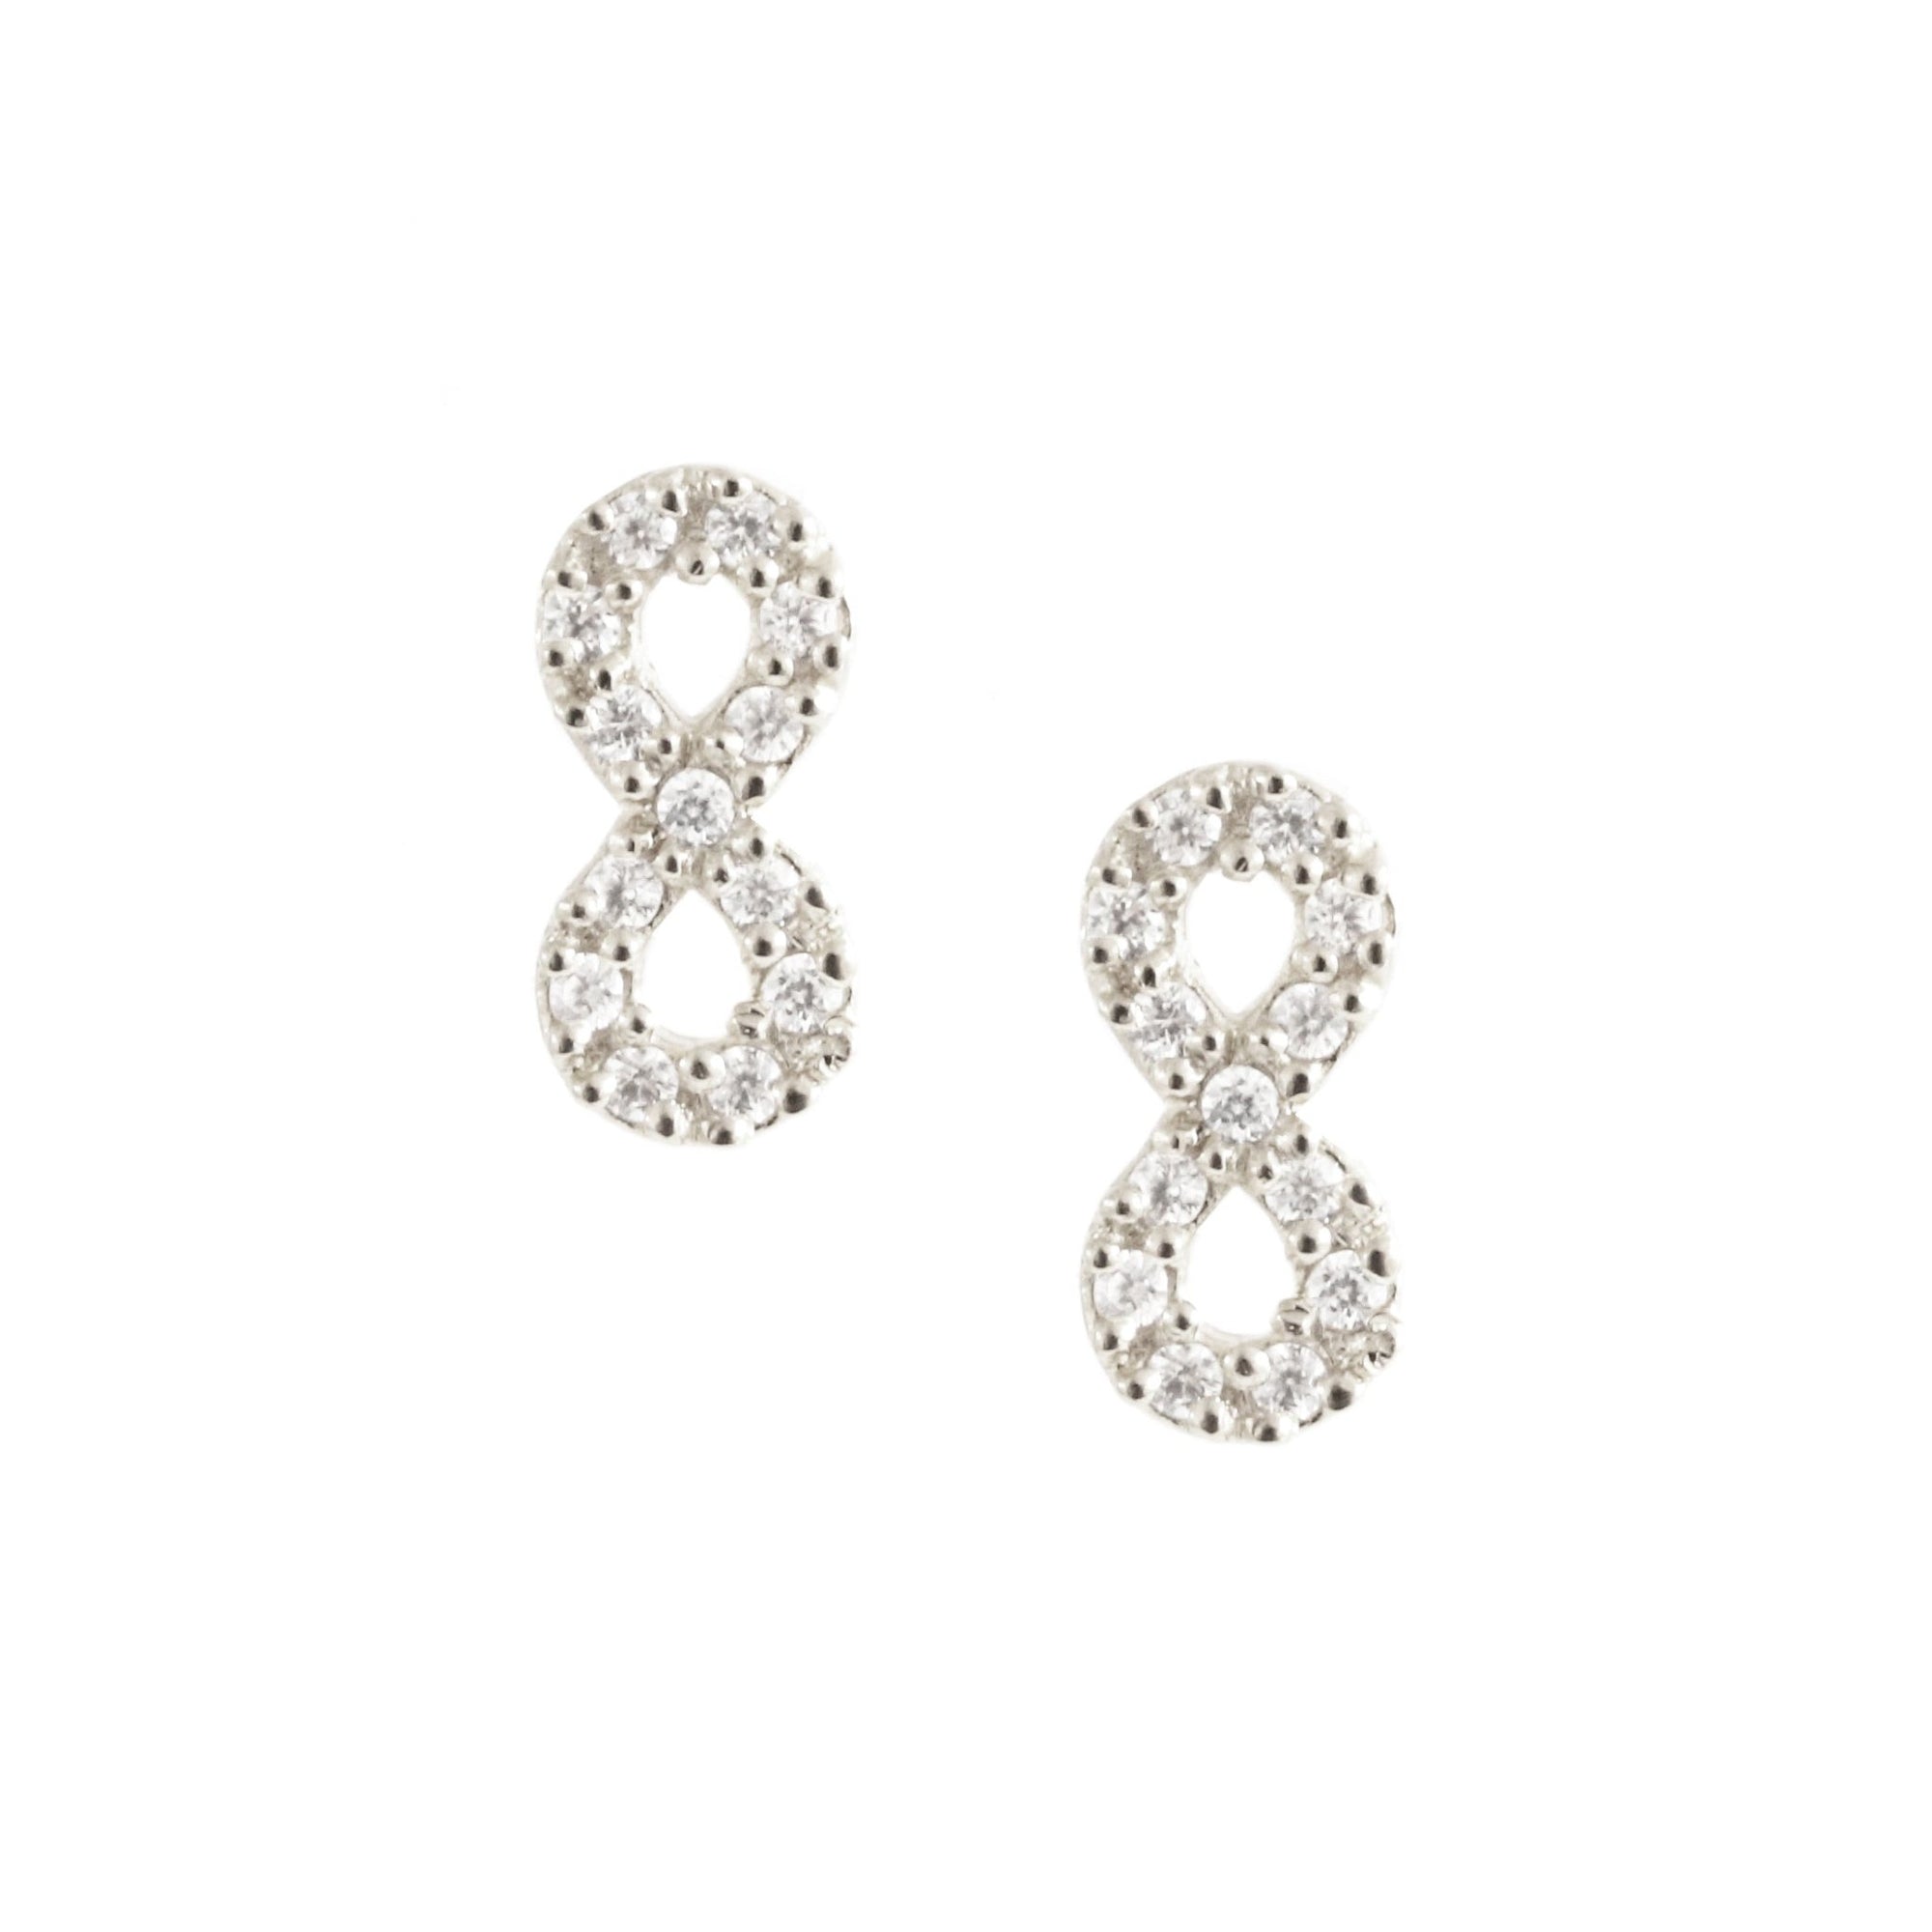 LOVE INFINITY STUDS - CUBIC ZIRCONIA & SILVER - SO PRETTY CARA COTTER